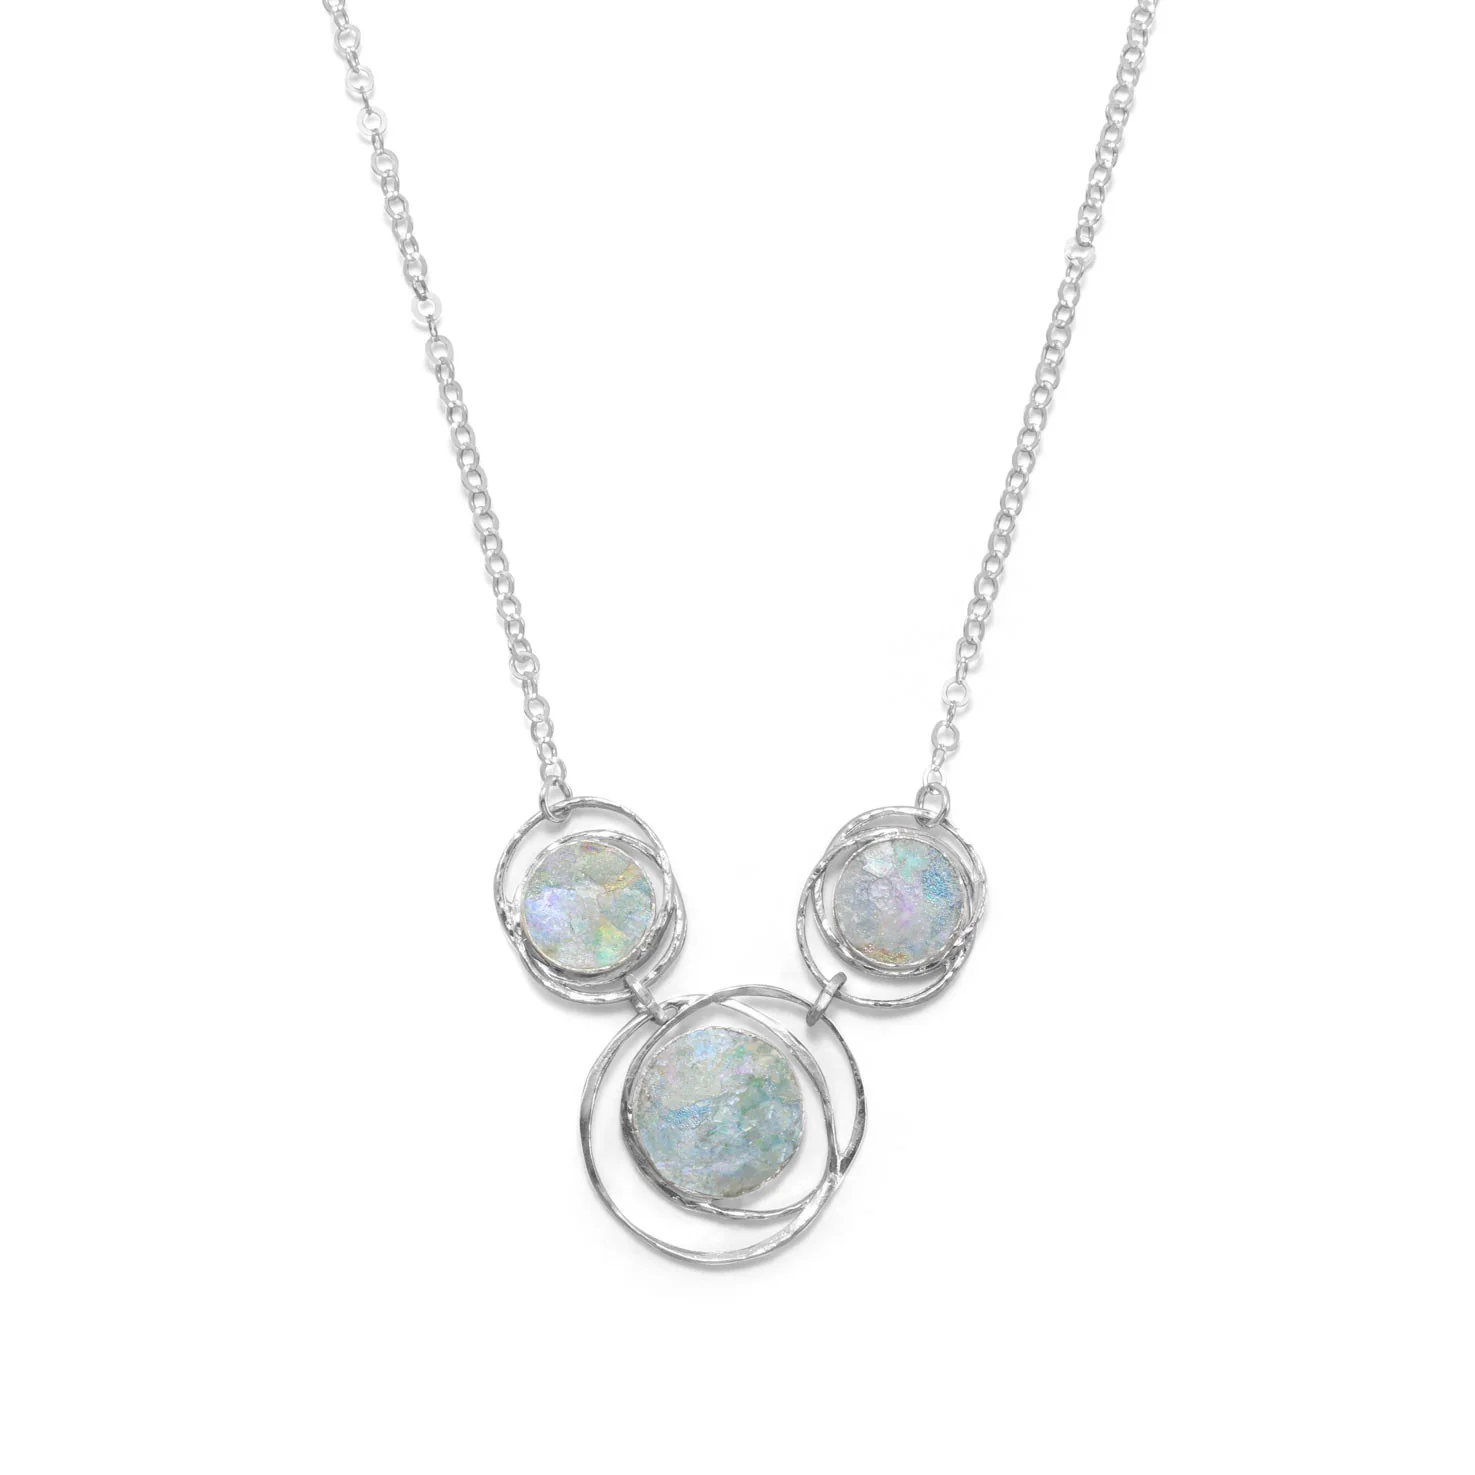 Abstract circle roman glass sterling silver necklace1 thumb200